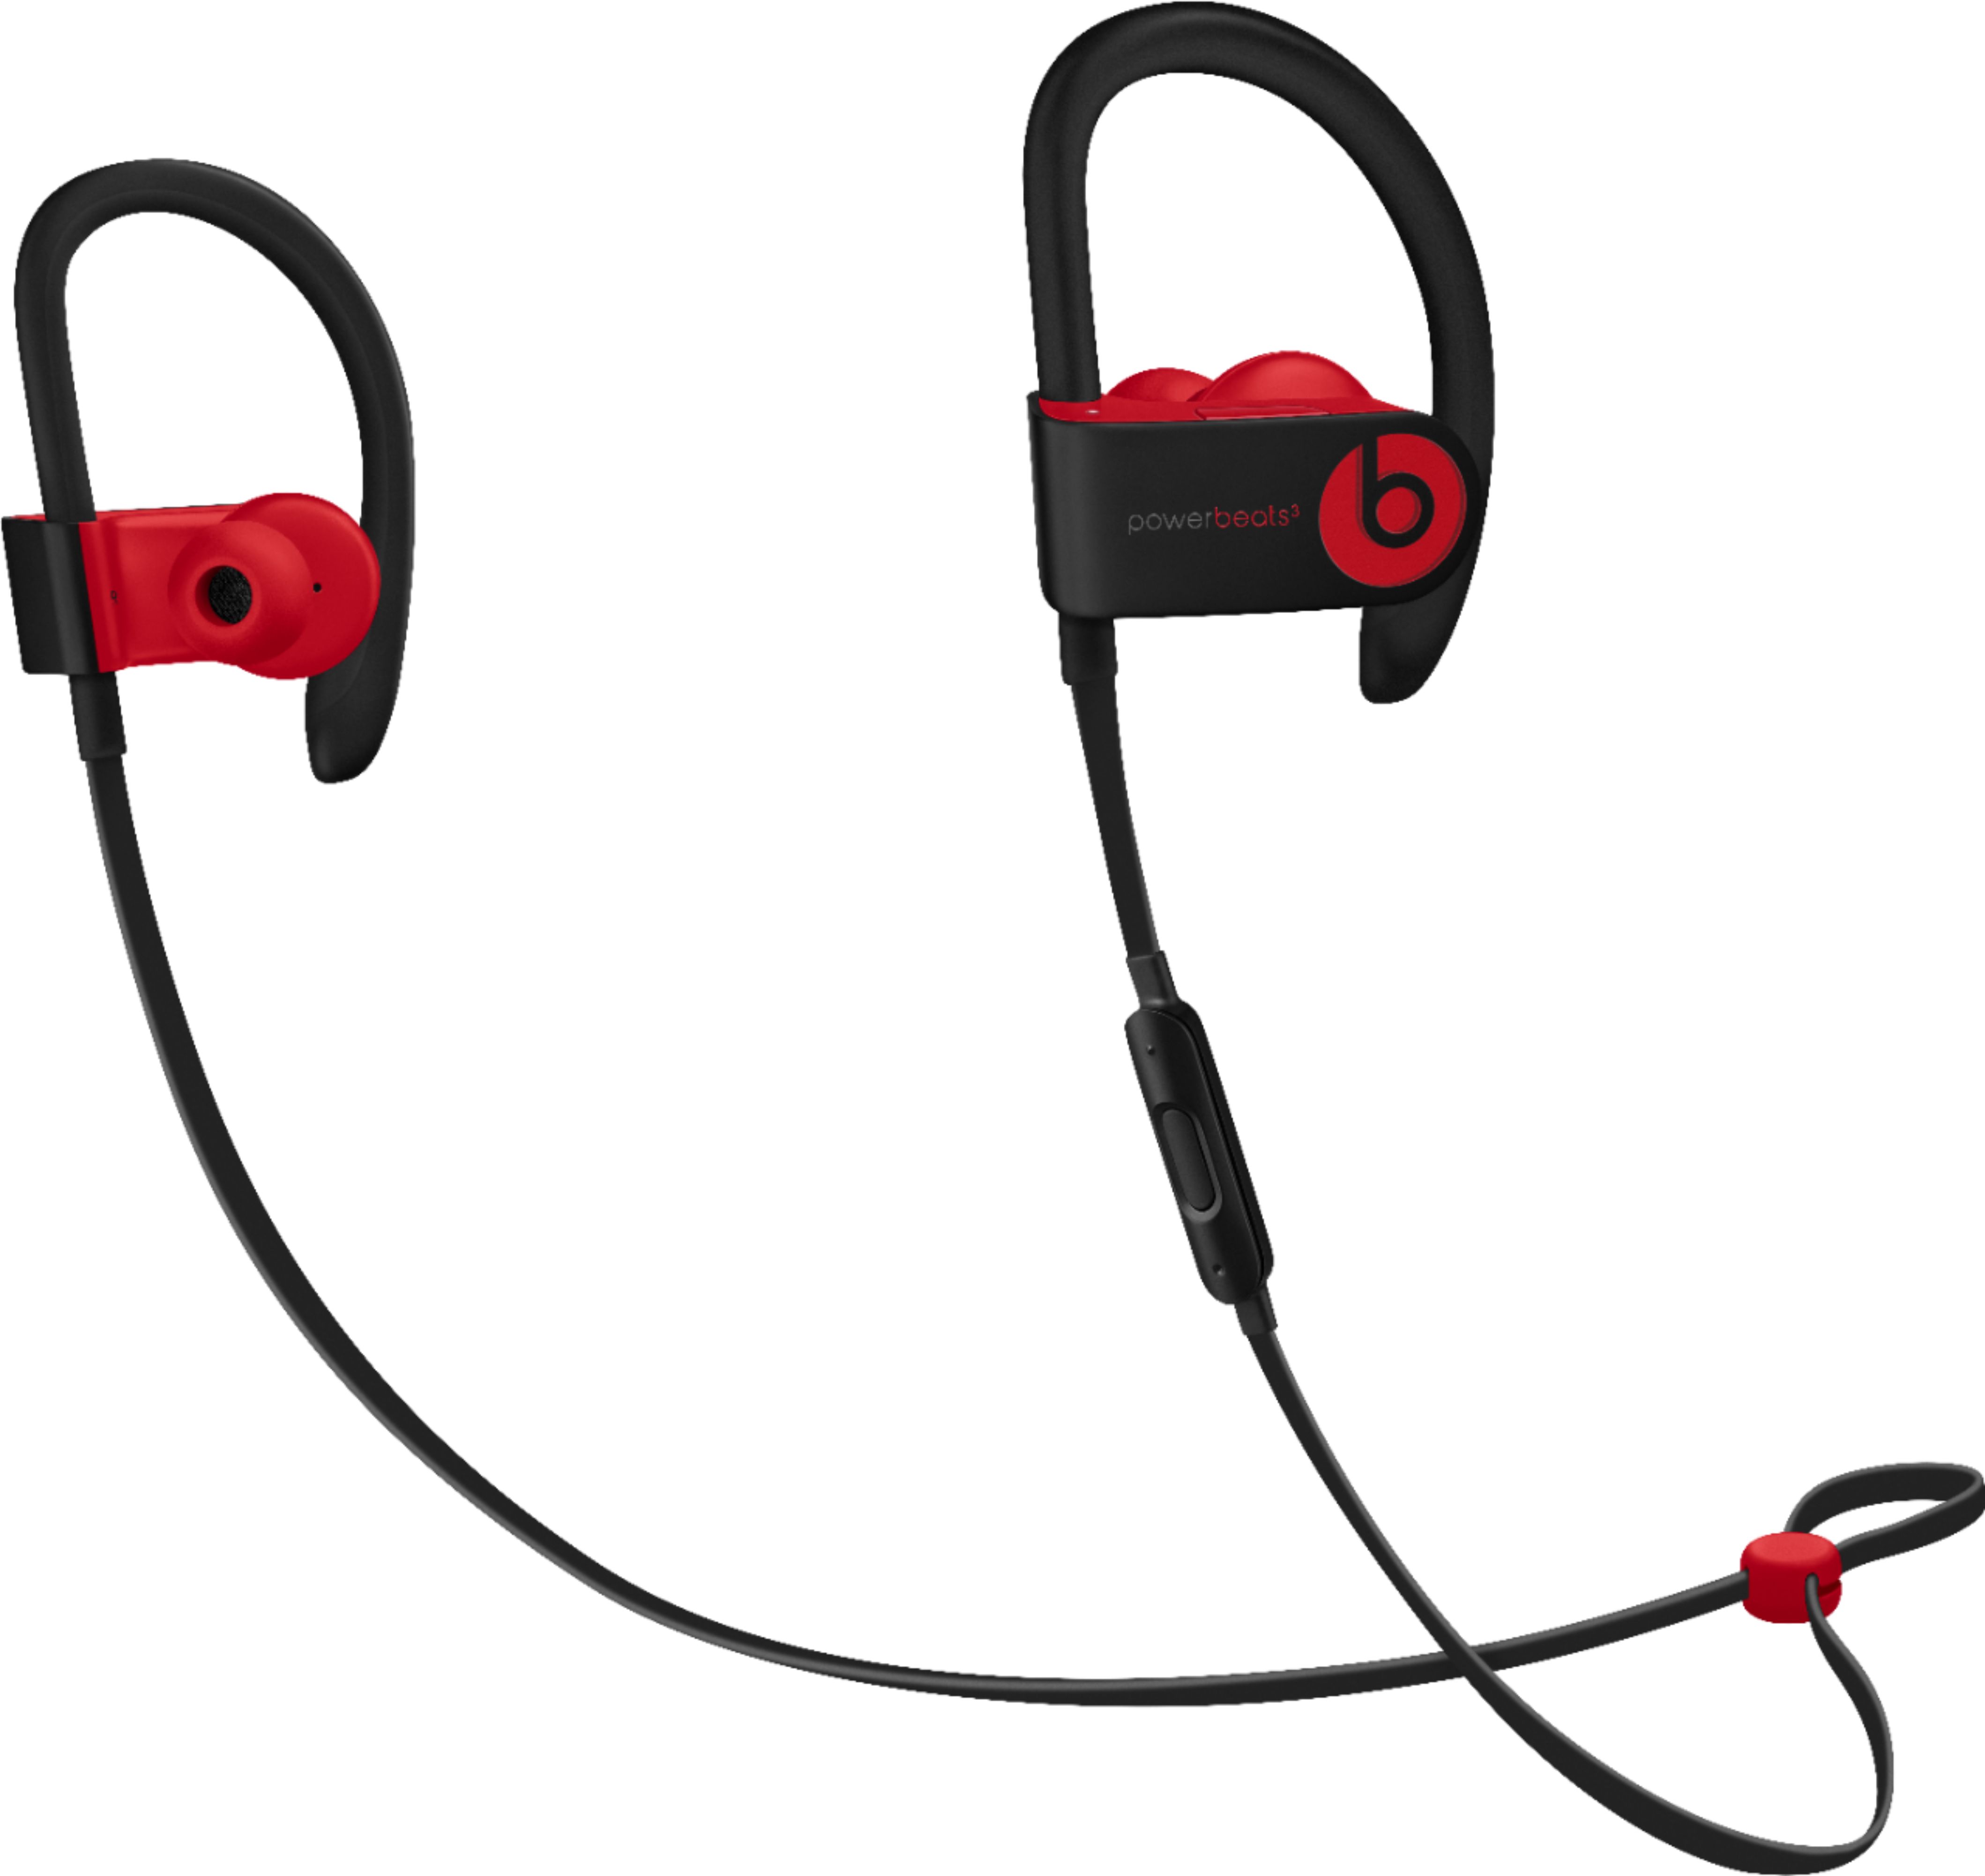 powerbeats red and black